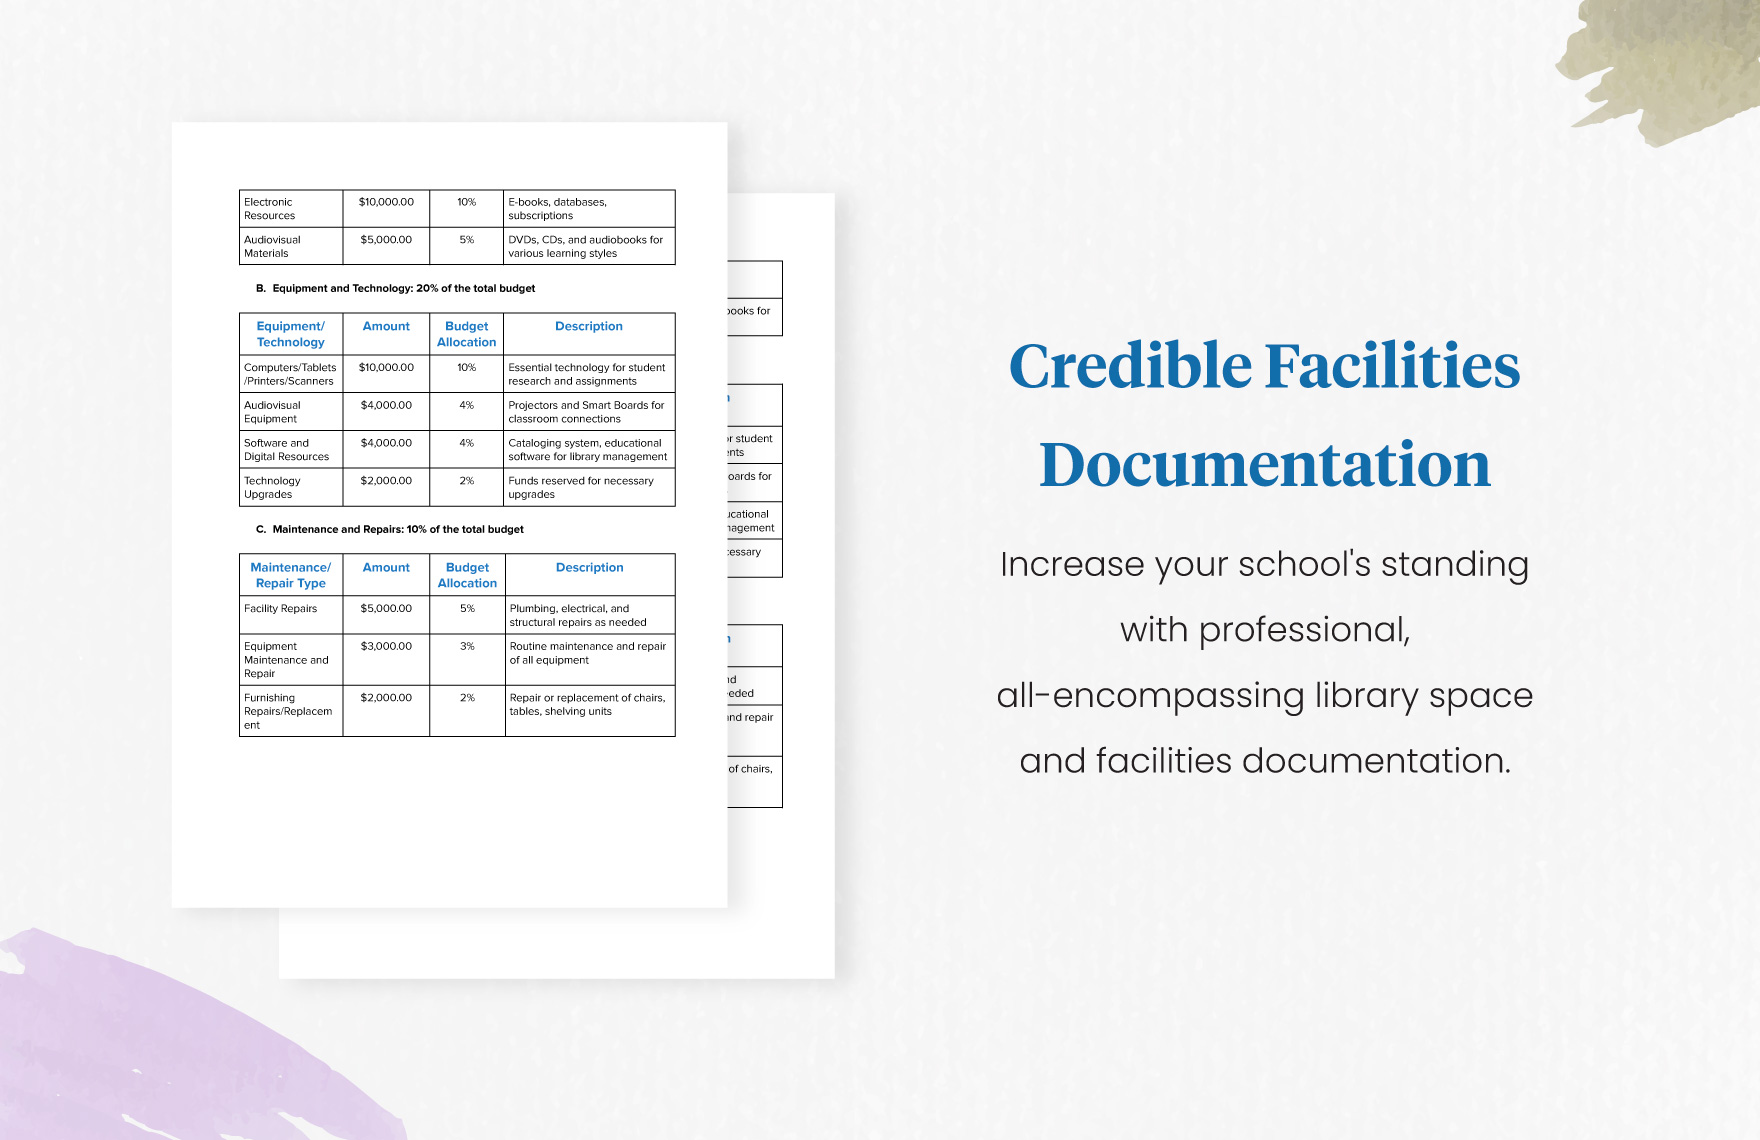 School Library Facilities Budget Template